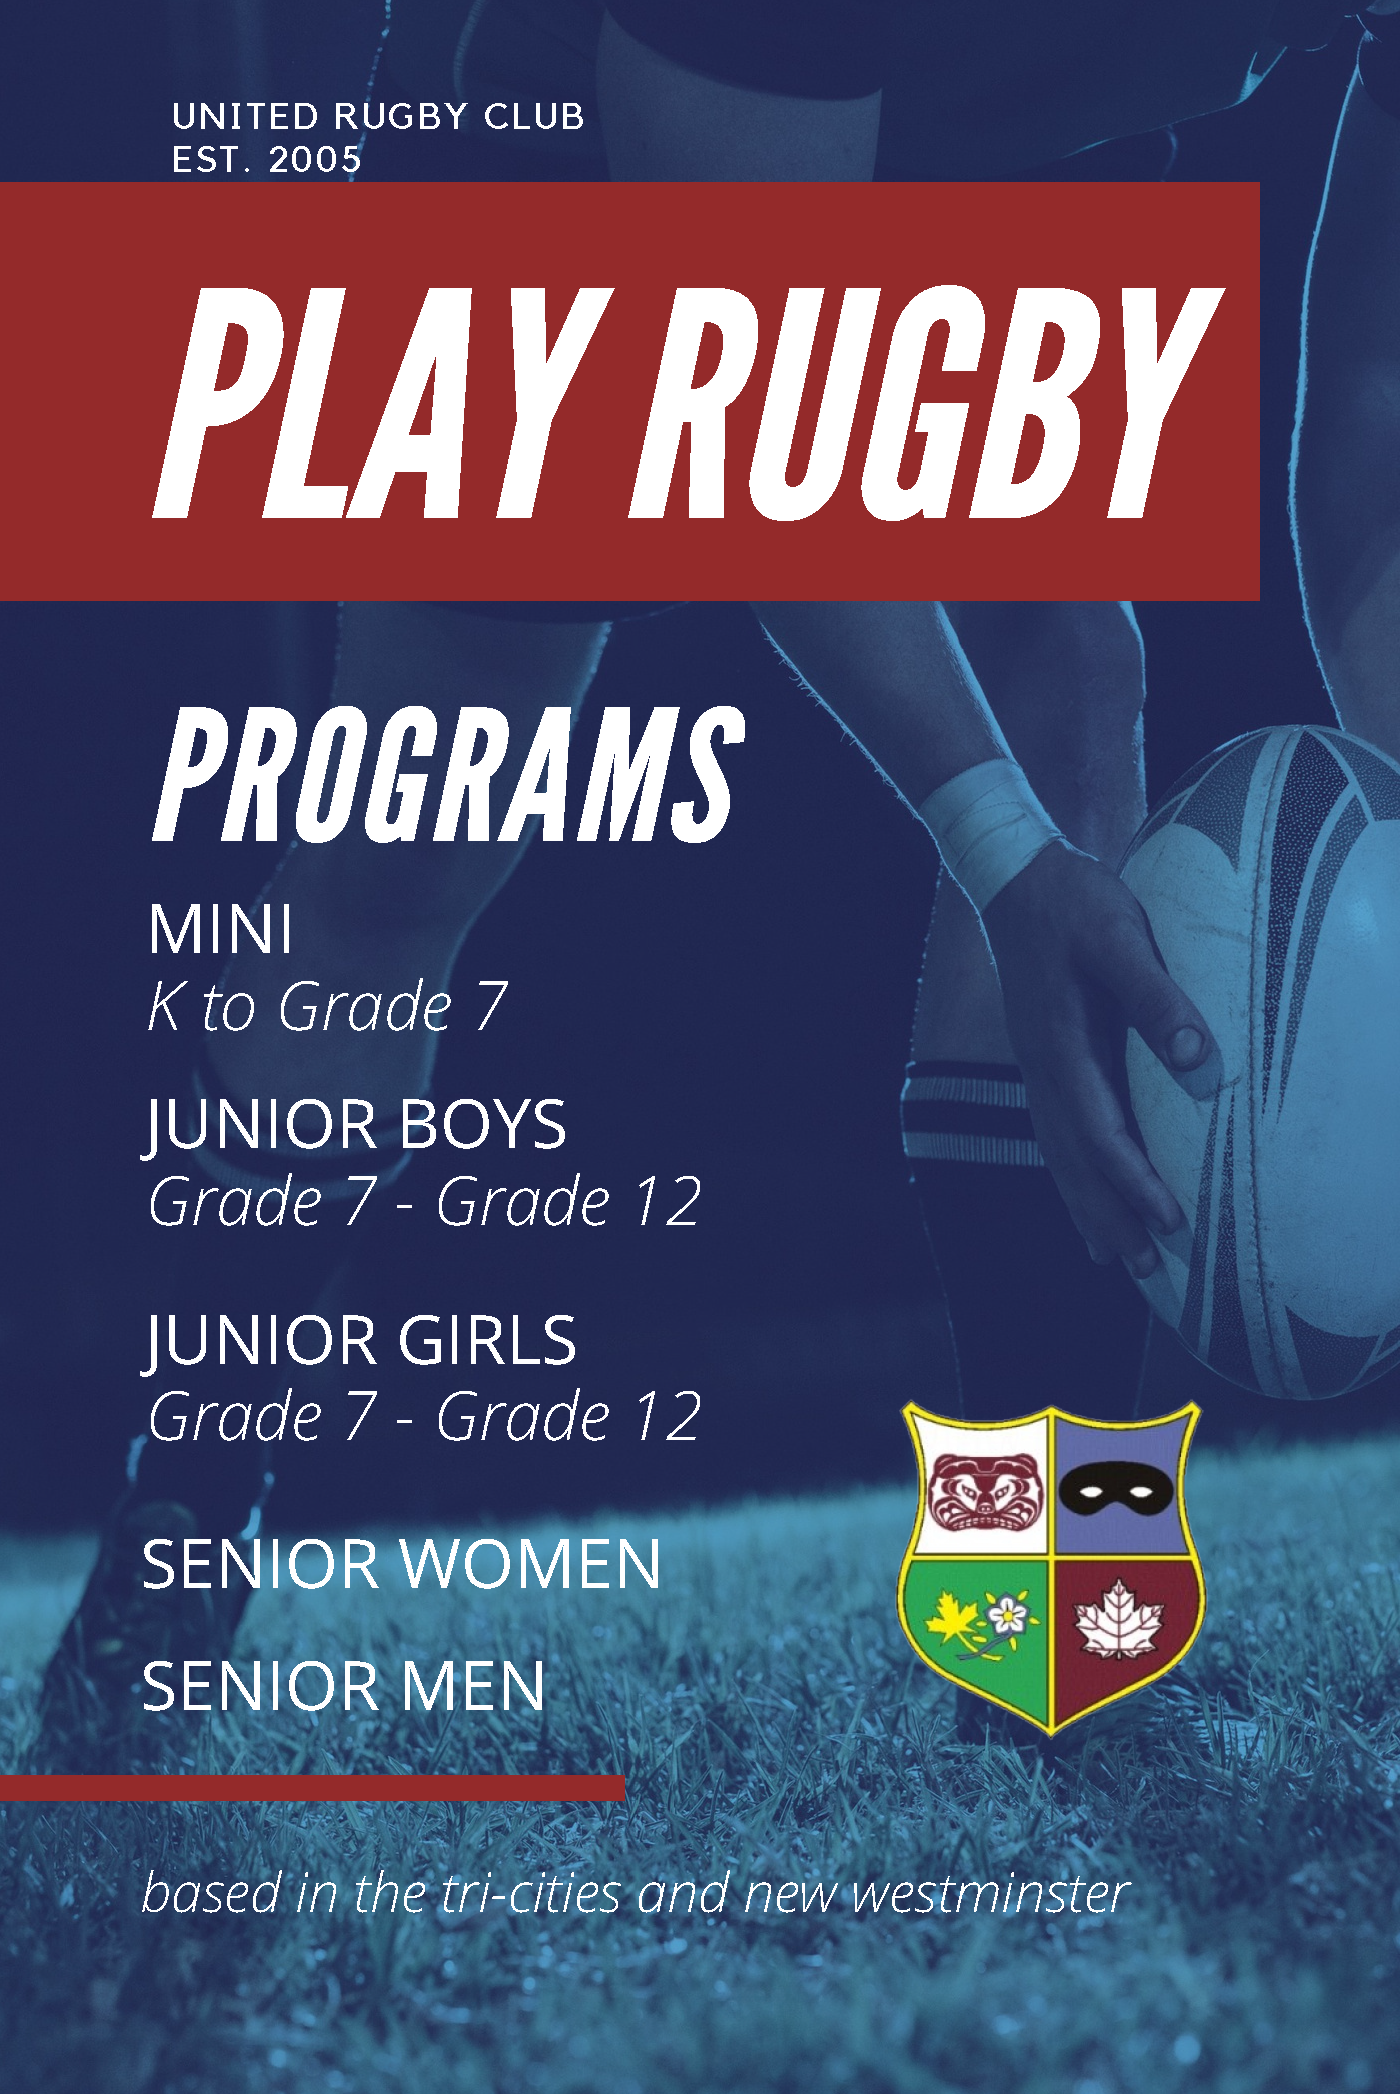 United Rugby Club Pamphlet_Page_1.png